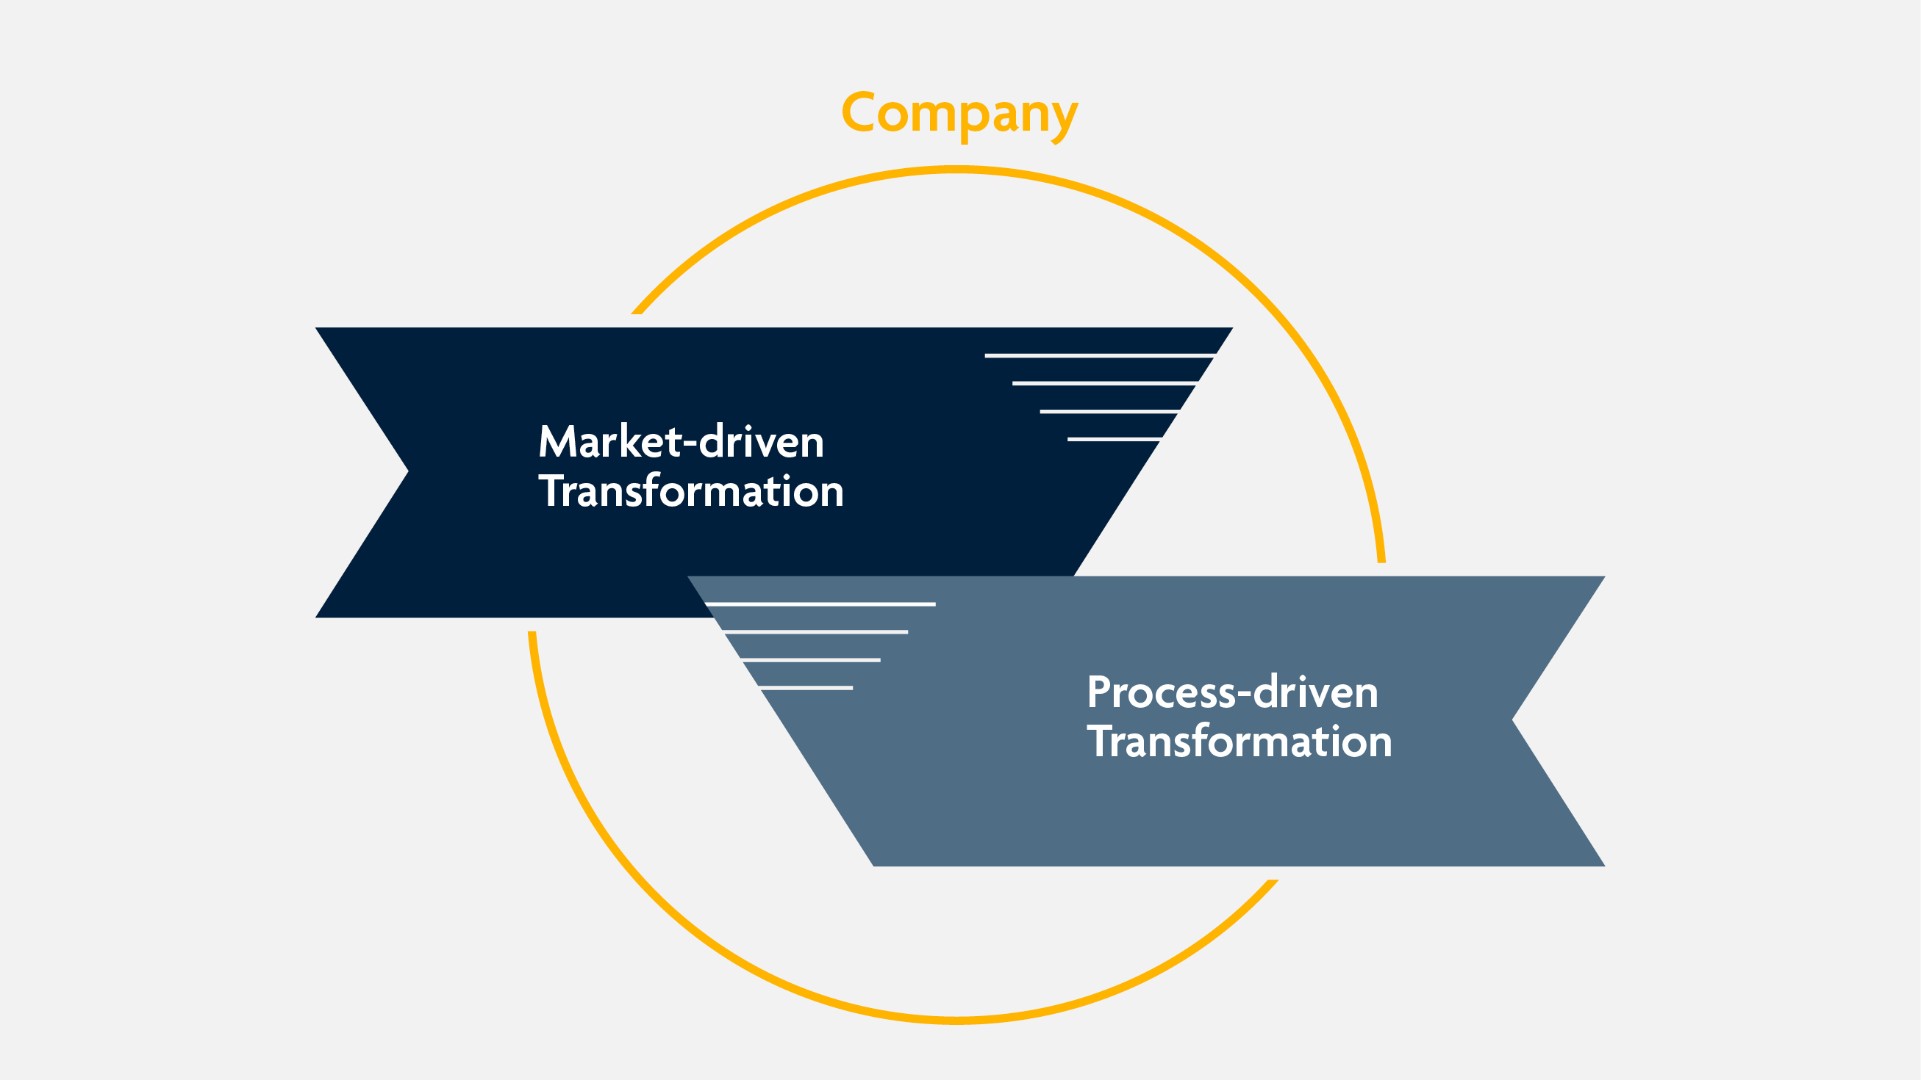 A circle shows the two possible transformation routes: Market-driven and process-driven transformation